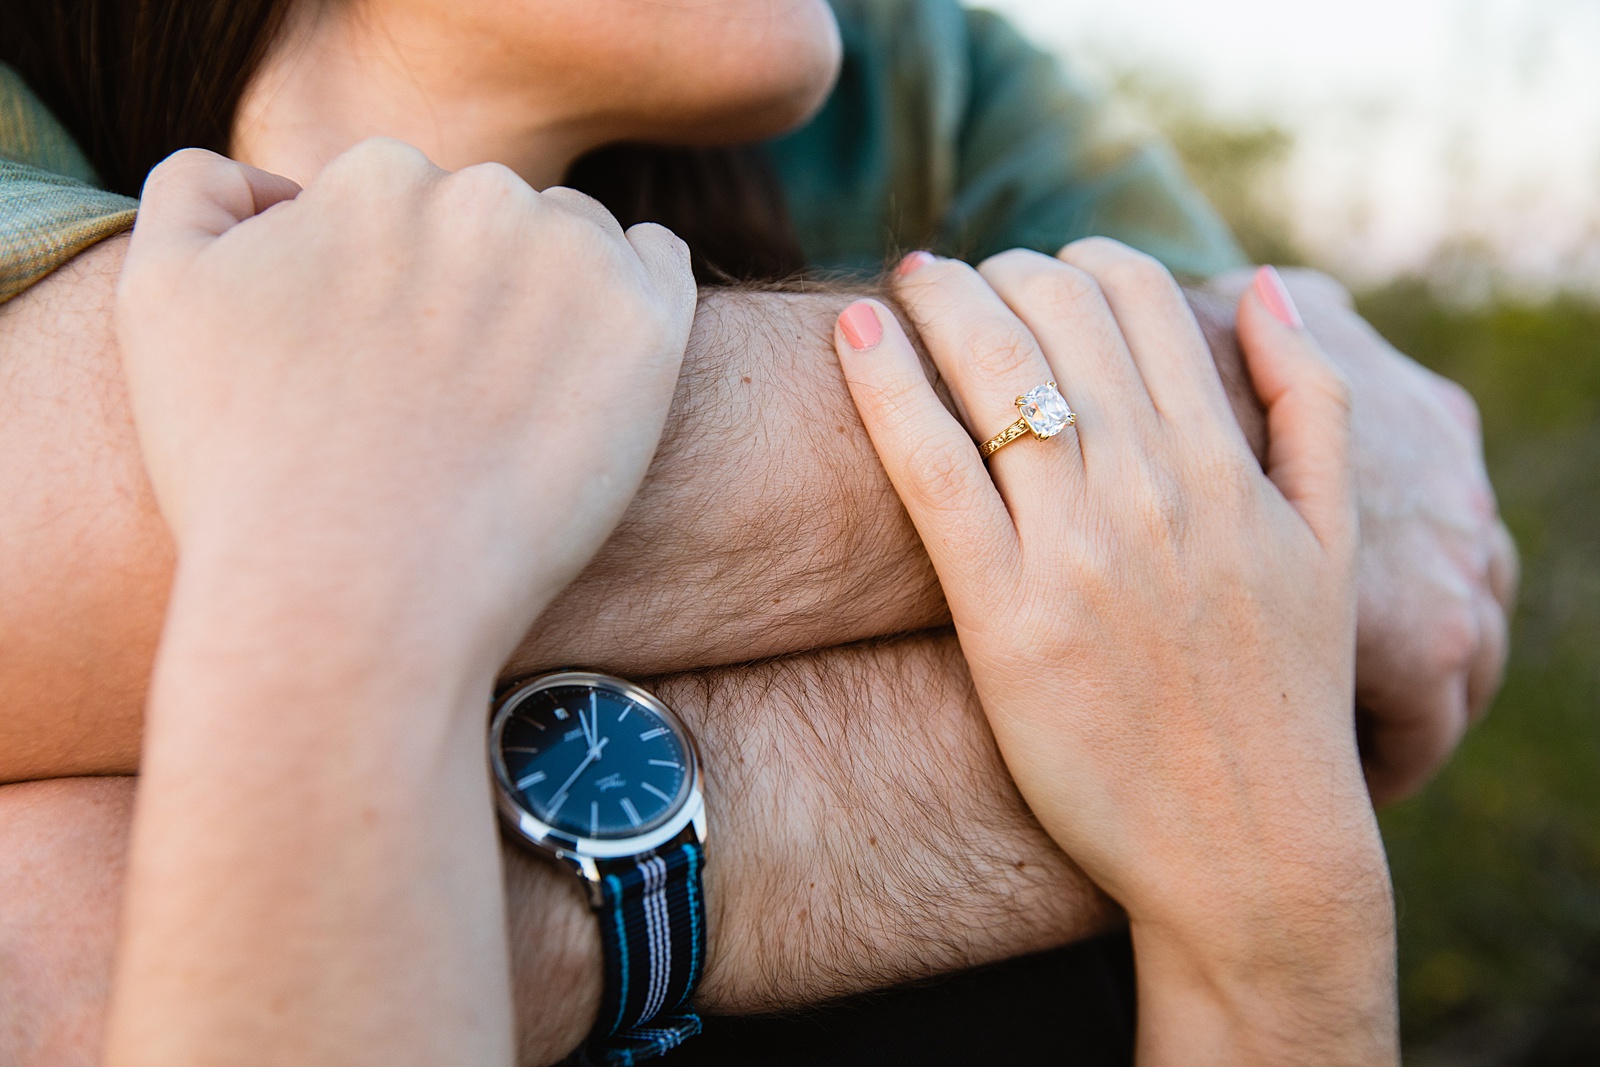 Detail image of engagement ring during during engagement session by Juniper and Co Photography.